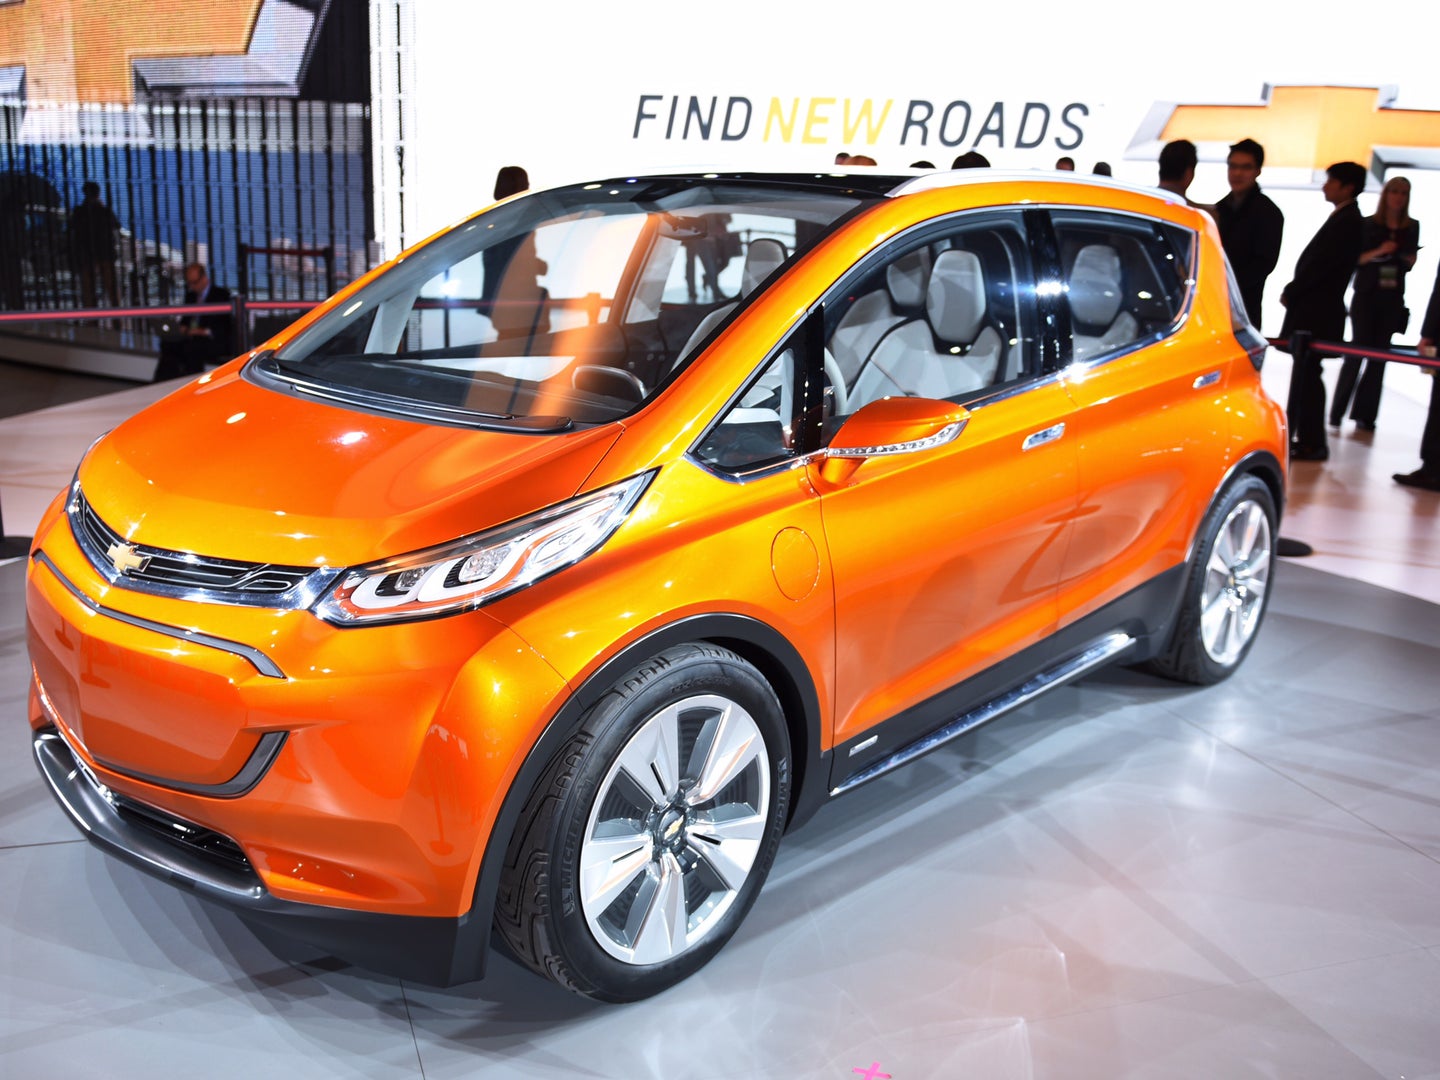 A look at the new Chevrolet Bolt